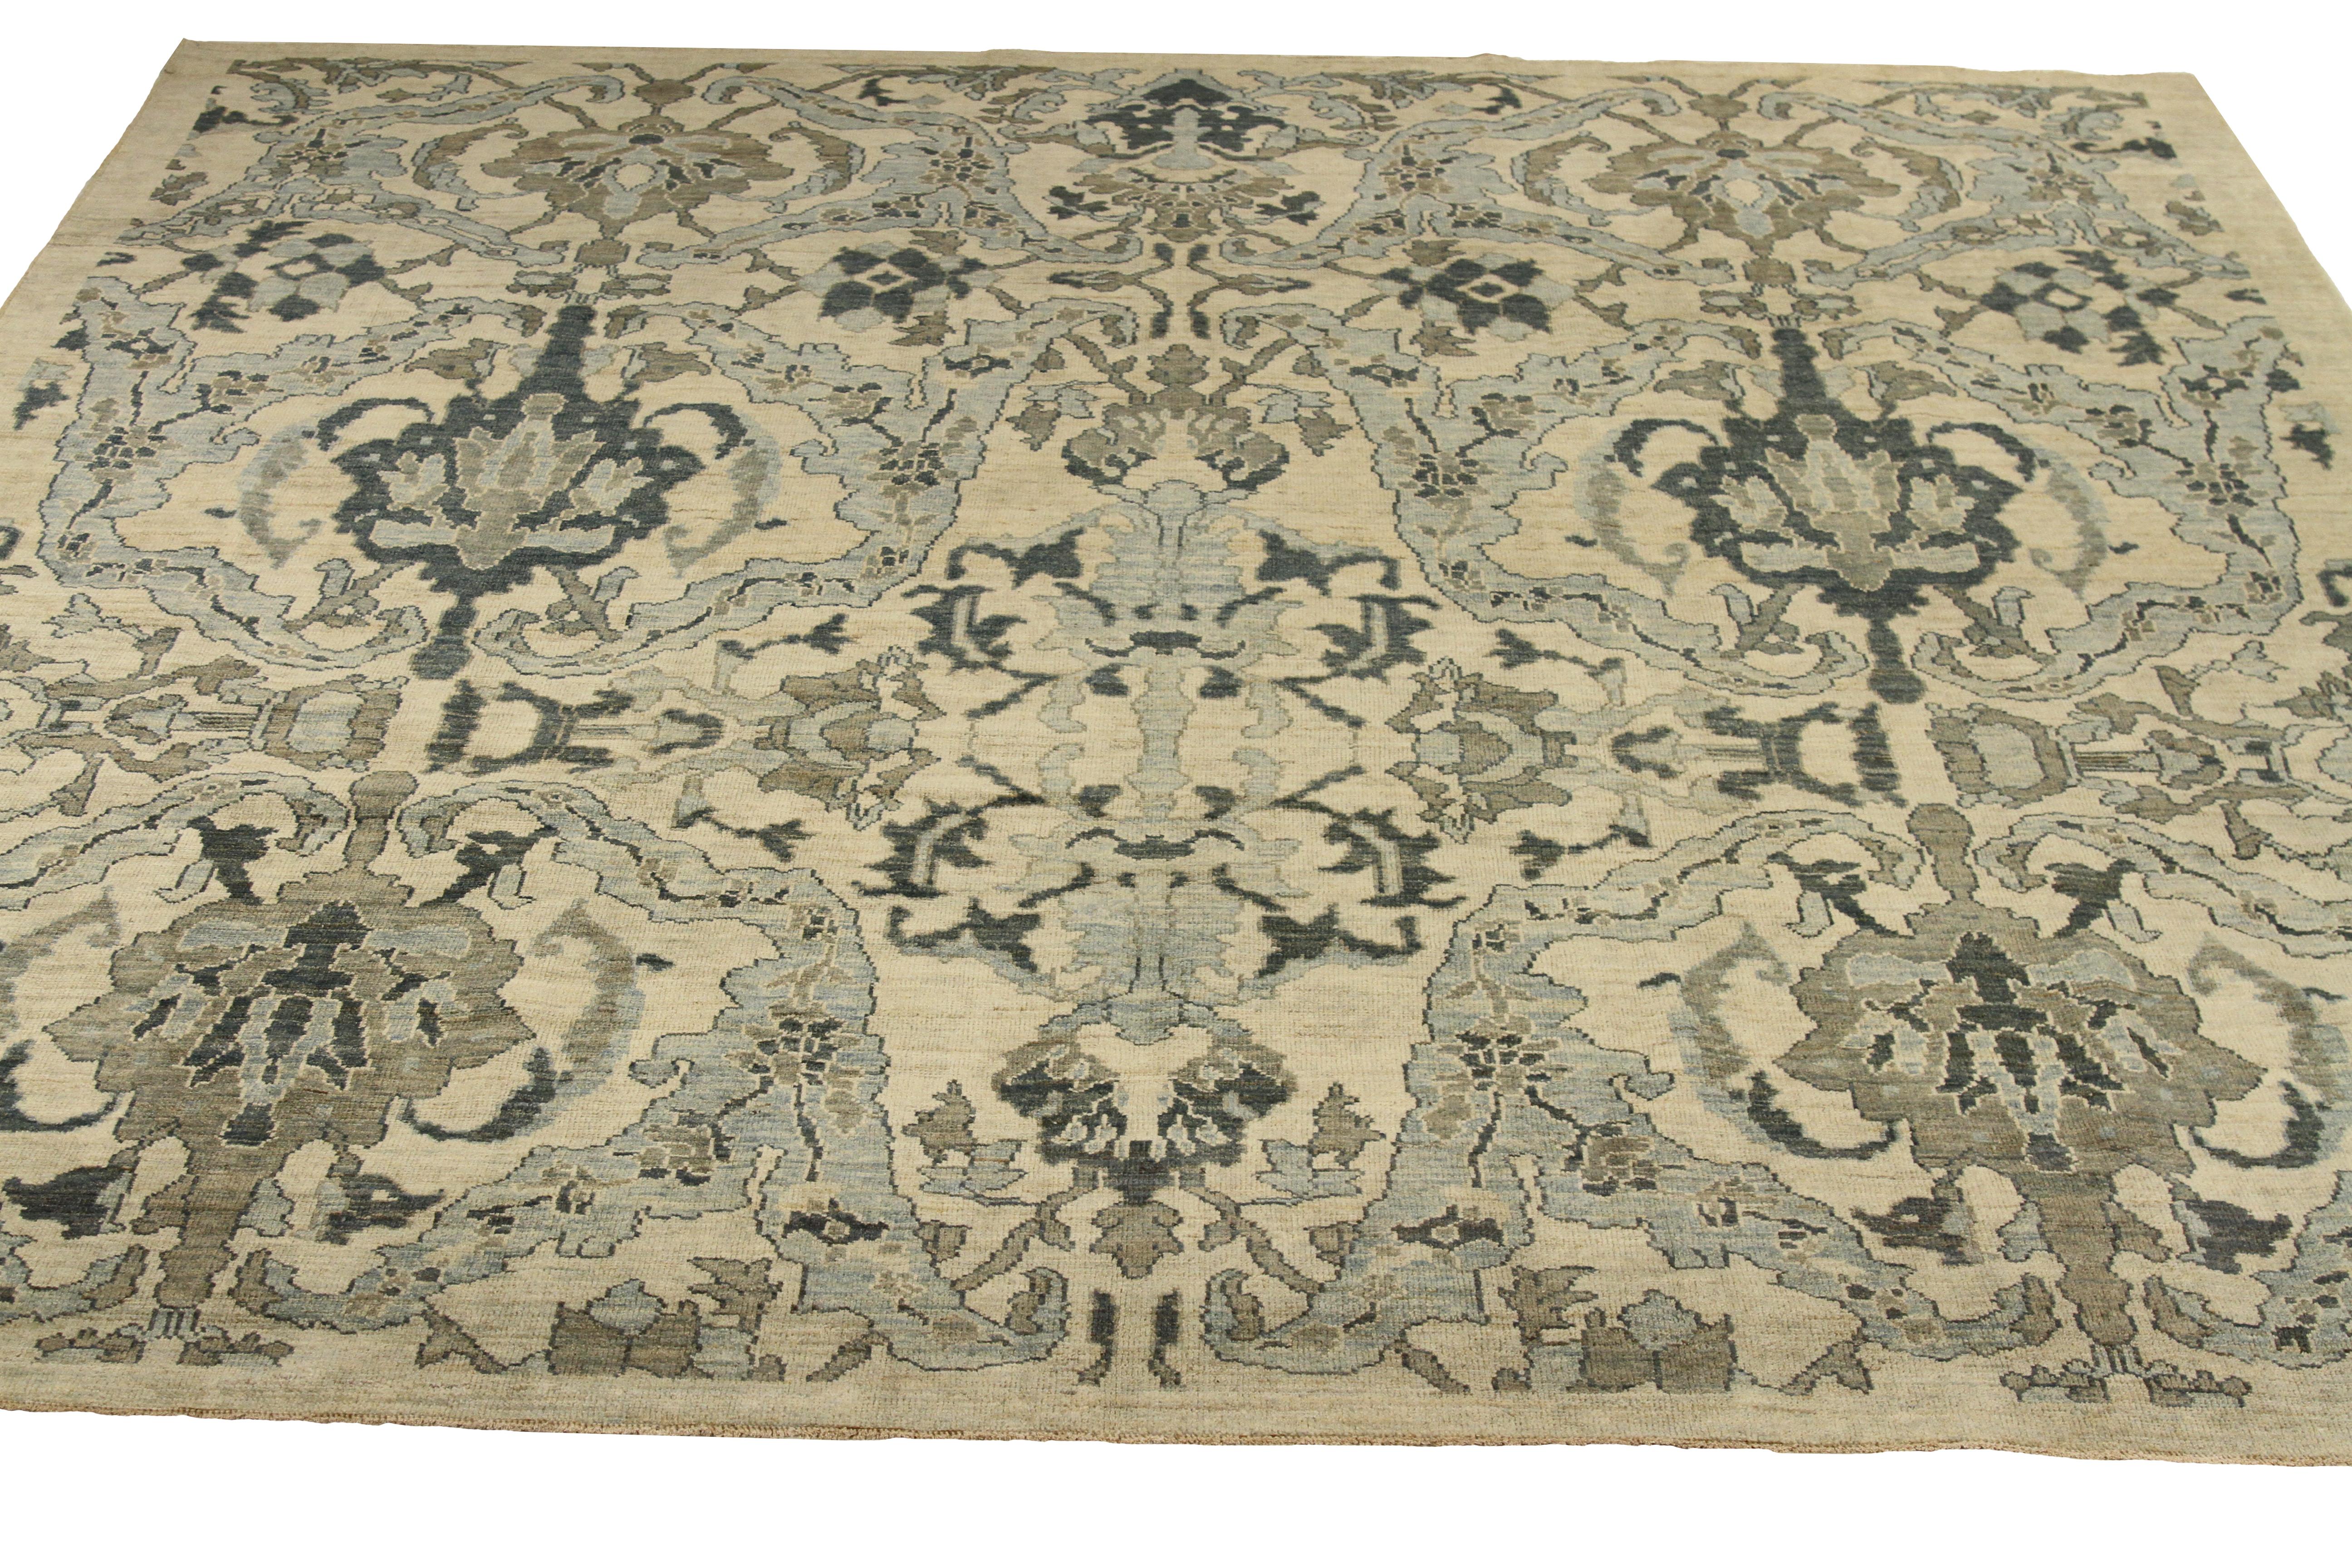 Modern hand-woven Persian area rug made from fine wool and all-natural vegetable dyes that are safe for people and pets. This beautiful piece features a rich field of floral details in various colors which is the traditional weaving design of